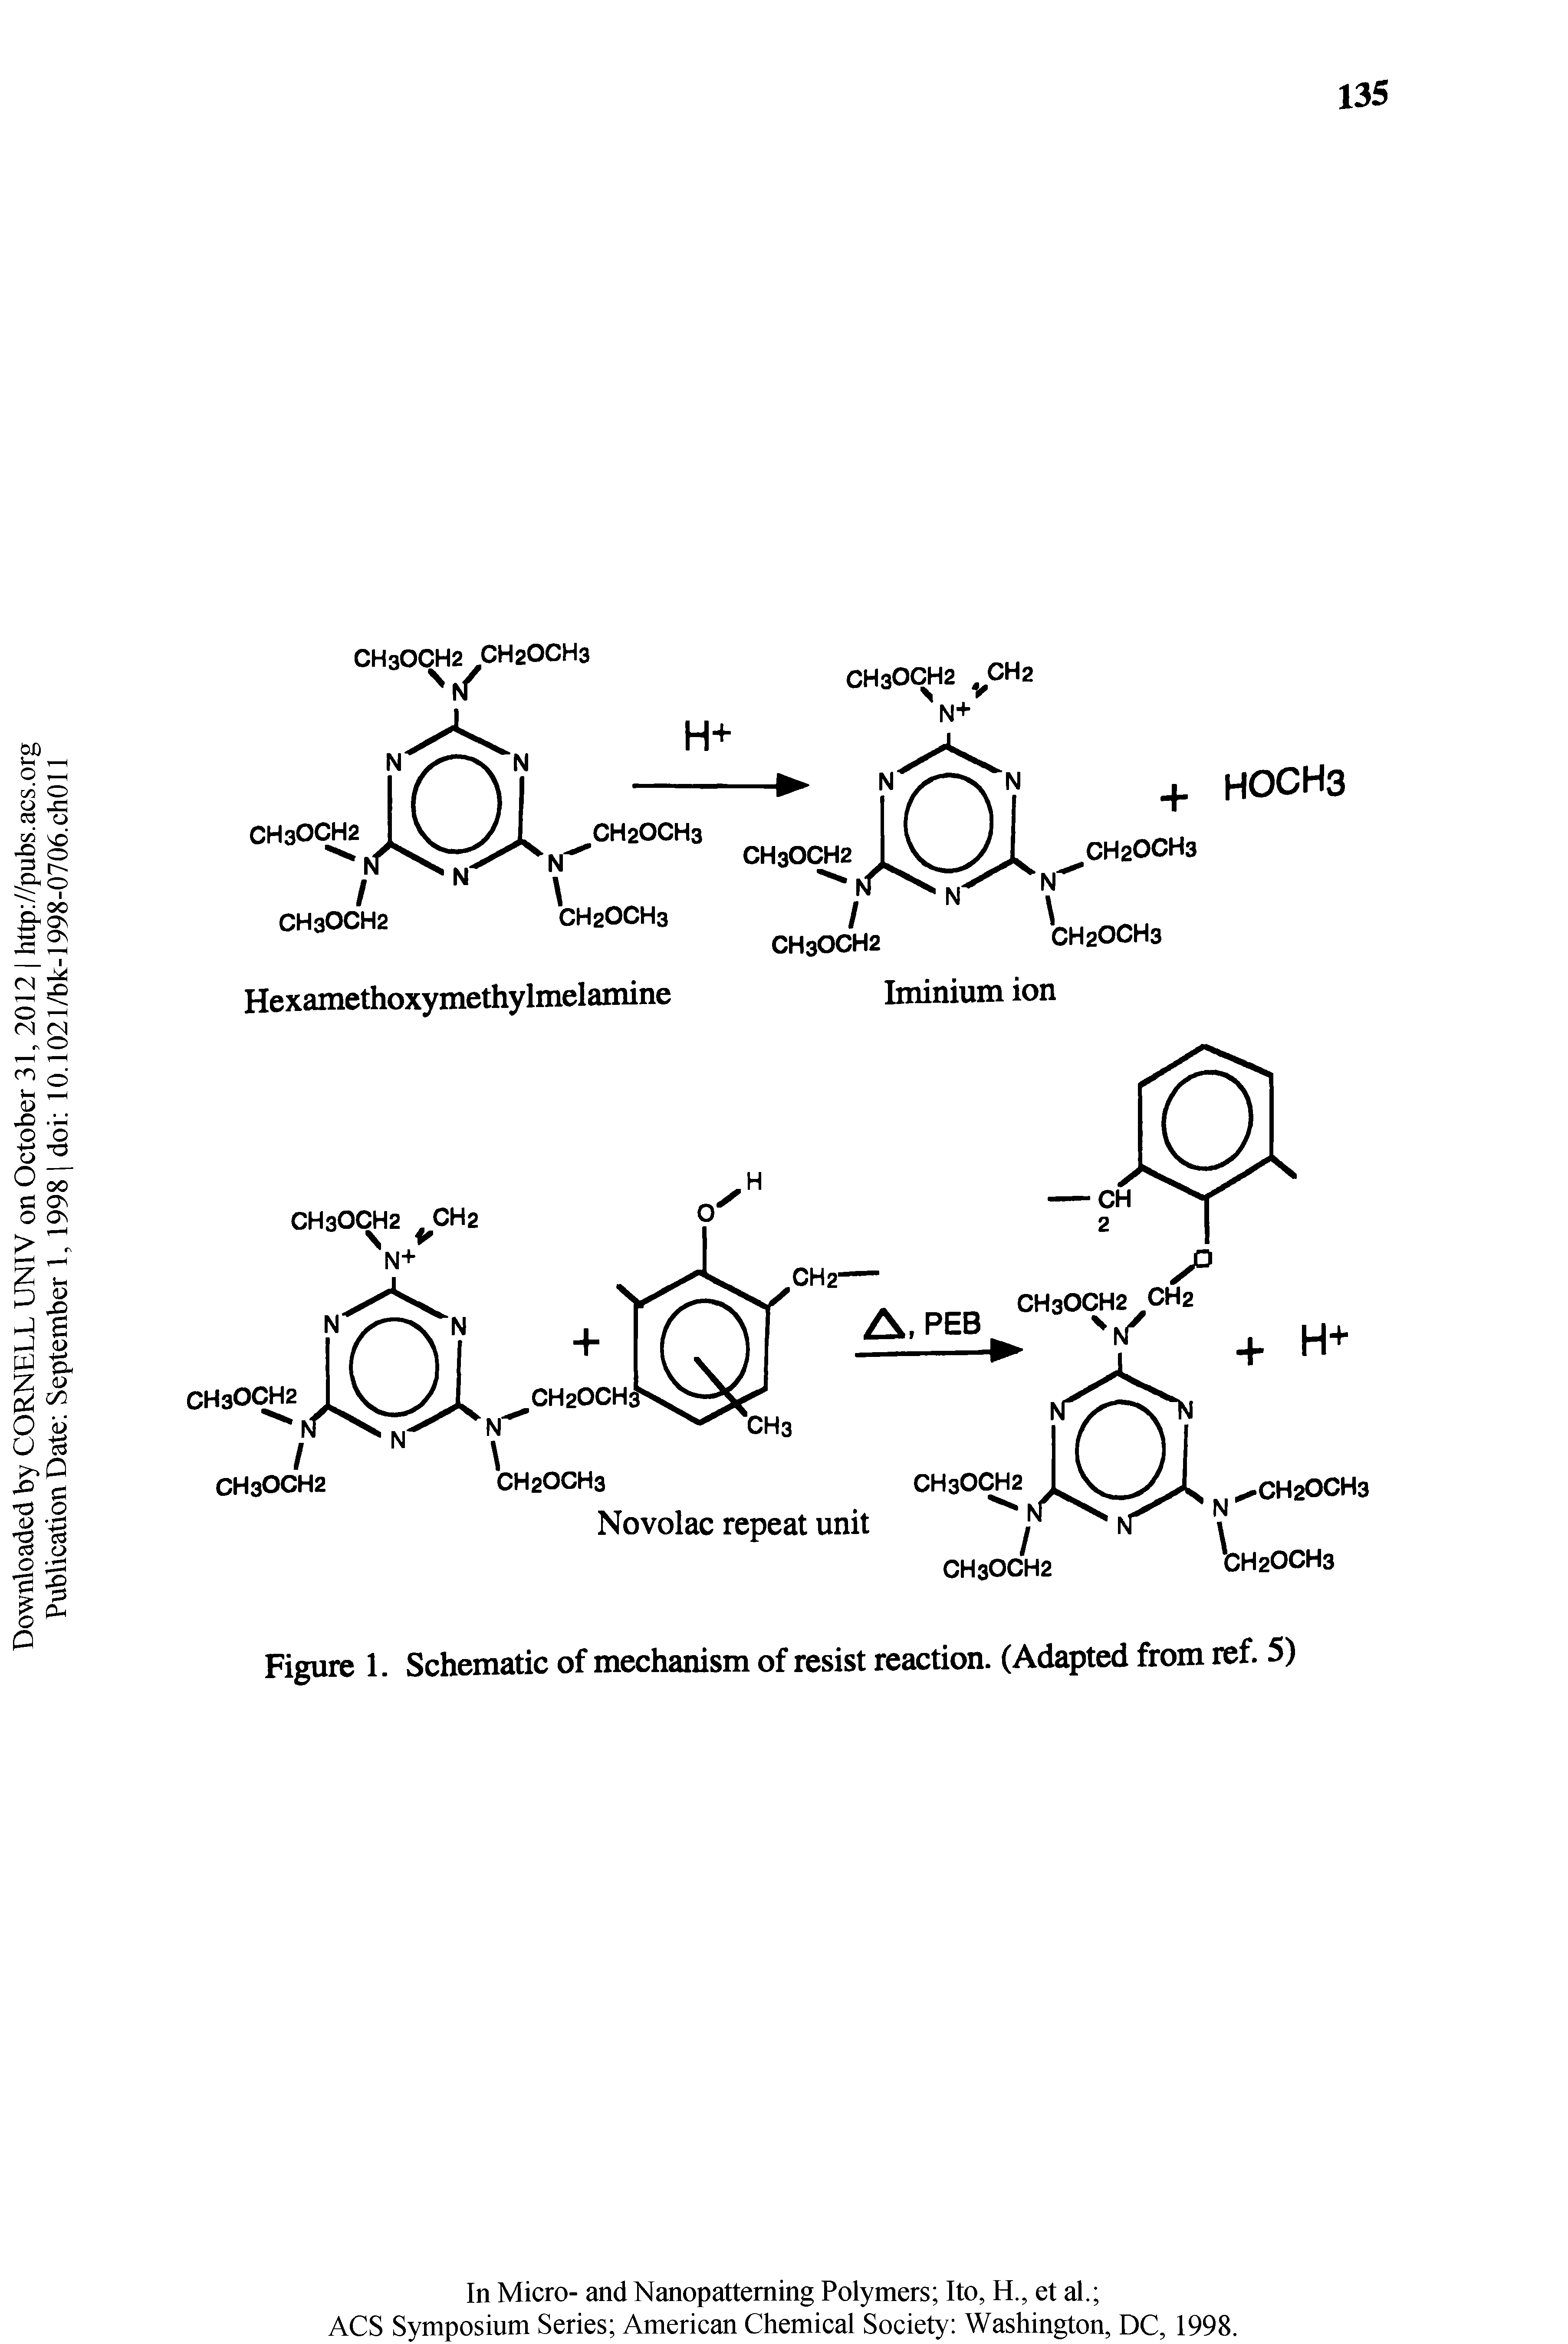 Figure 1. Schematic of mechanism of resist reaction. (Adapted from ref. 5)...